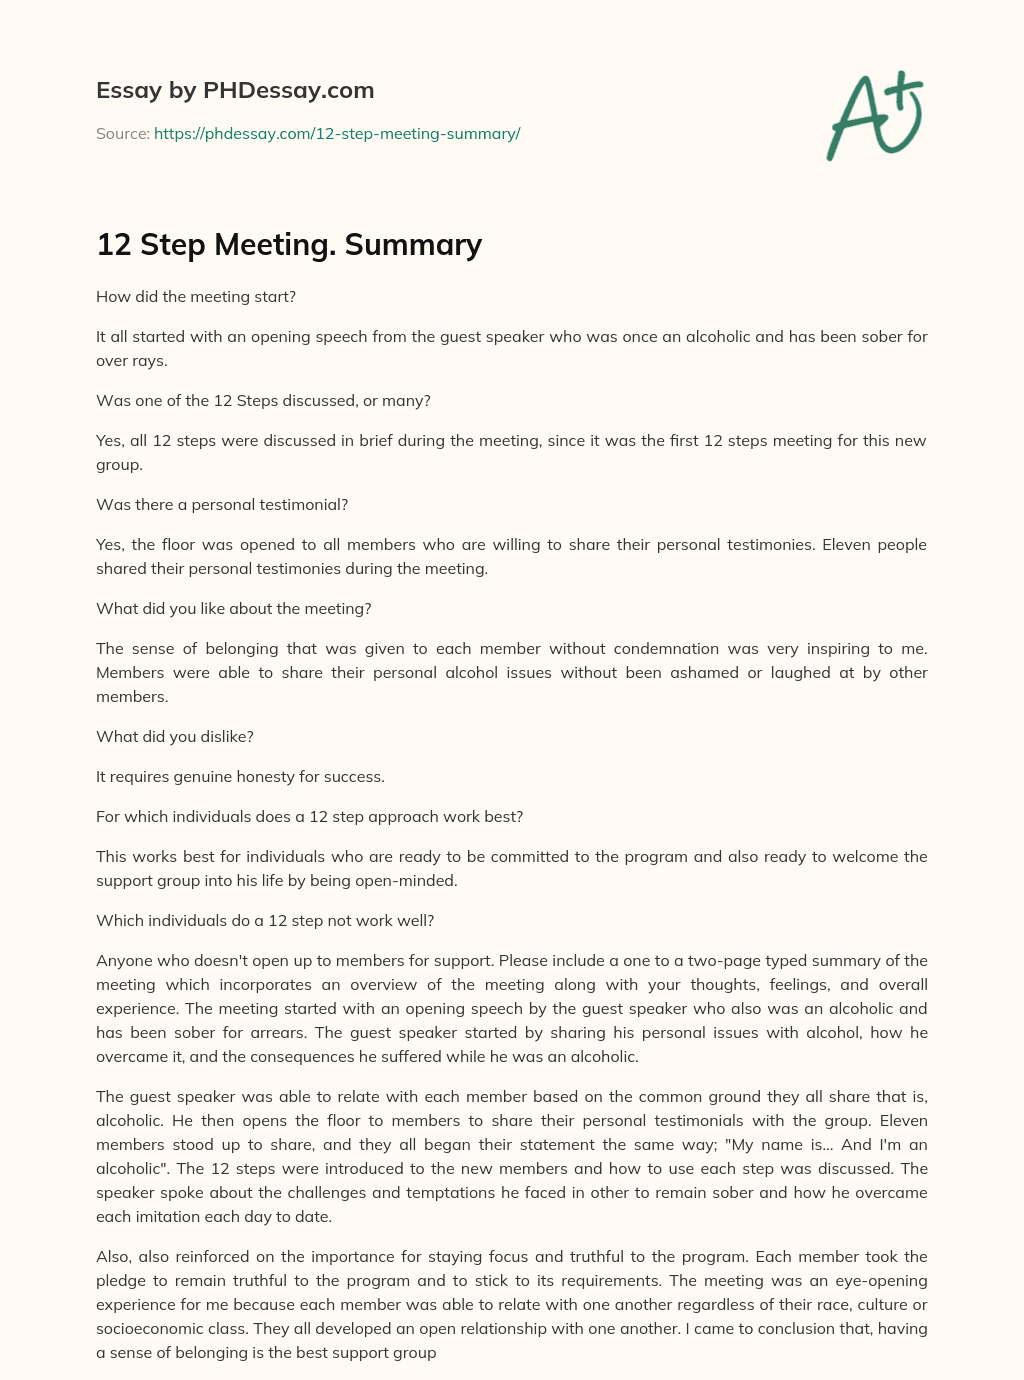 essay about business meeting